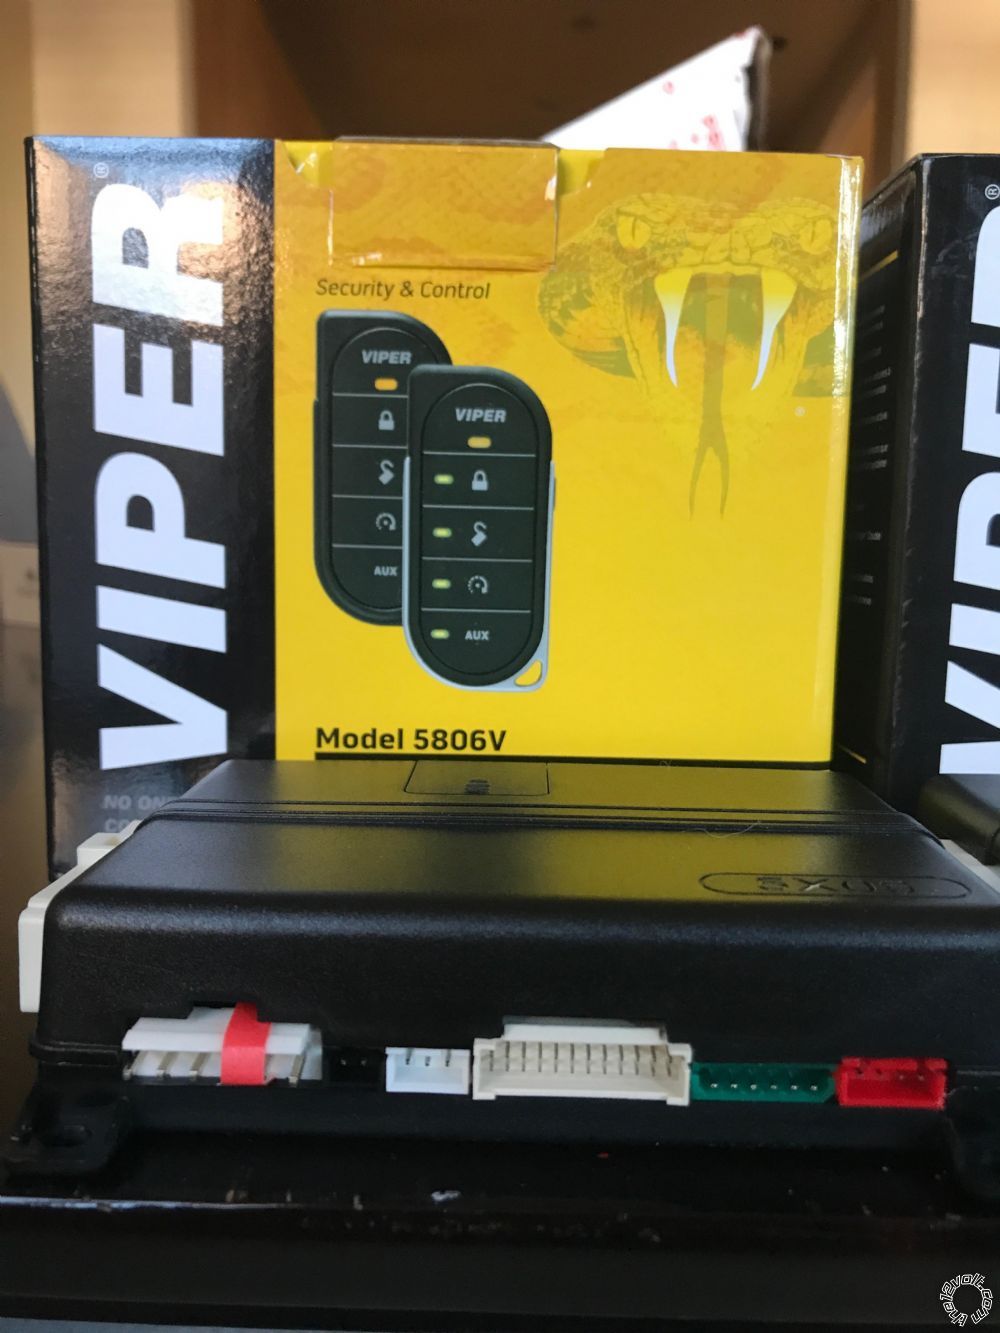 Can Anyone Explain the Viper 5806v Shut Off Switch? -- posted image.